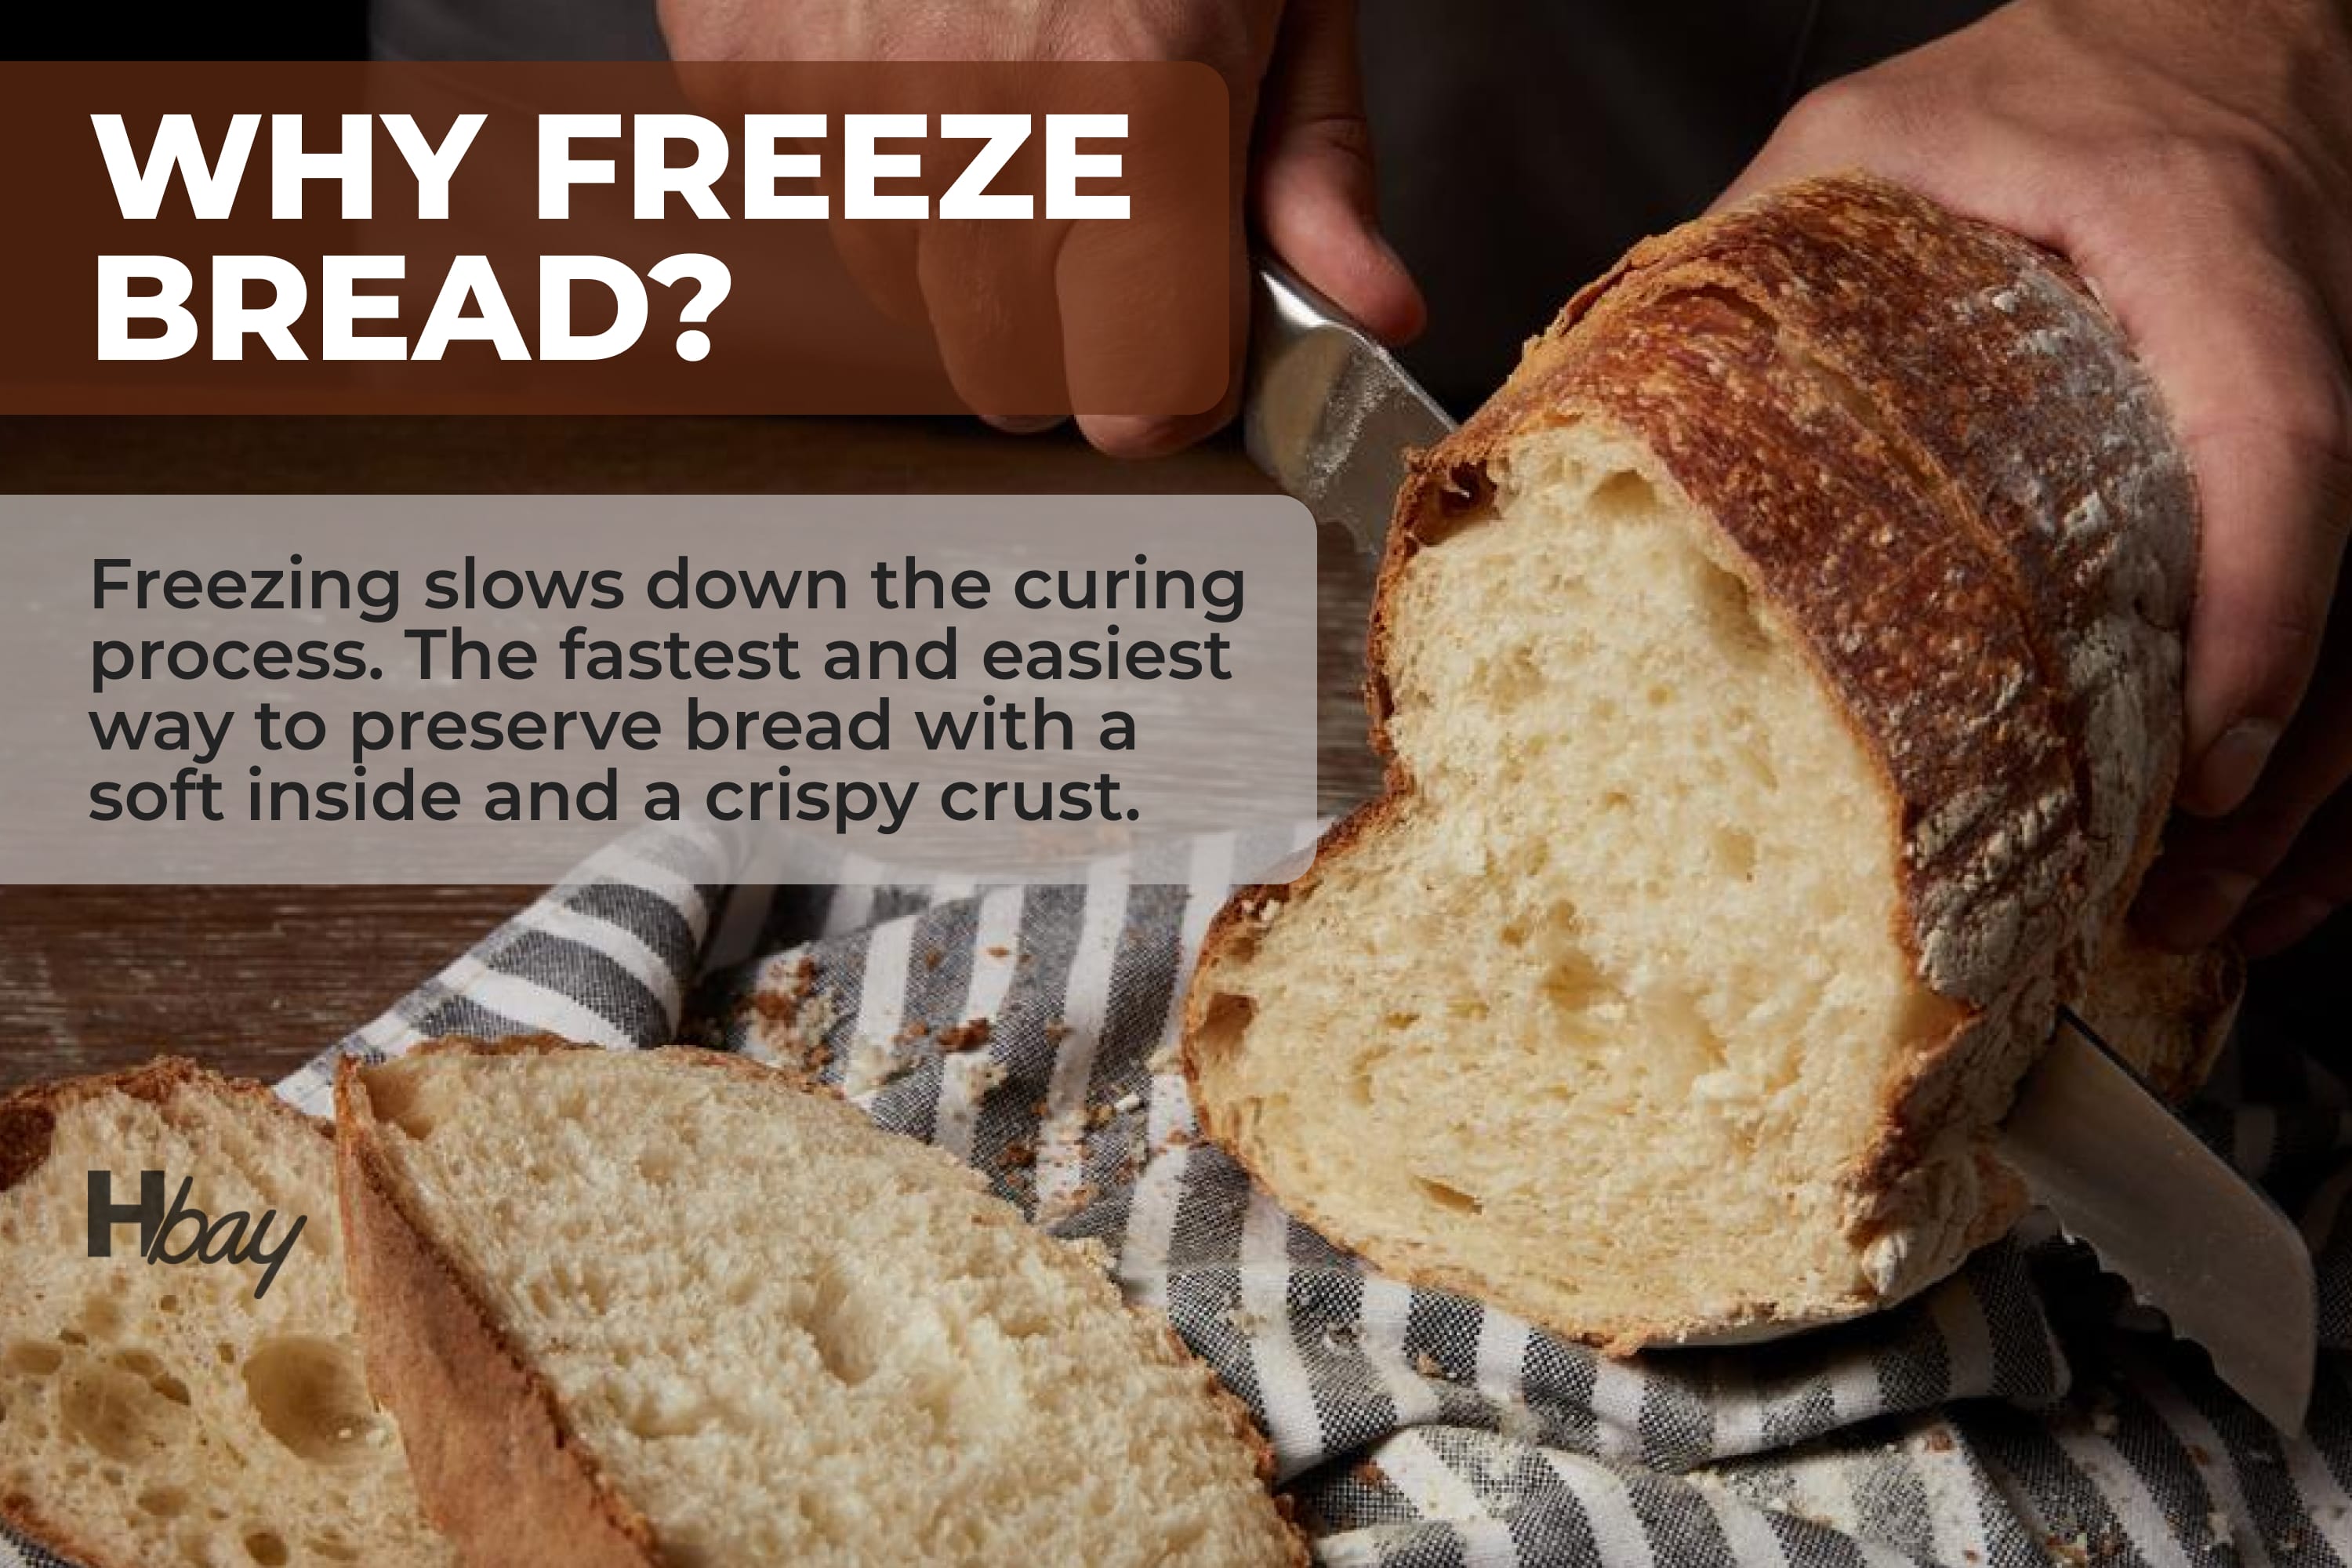 Why freeze bread